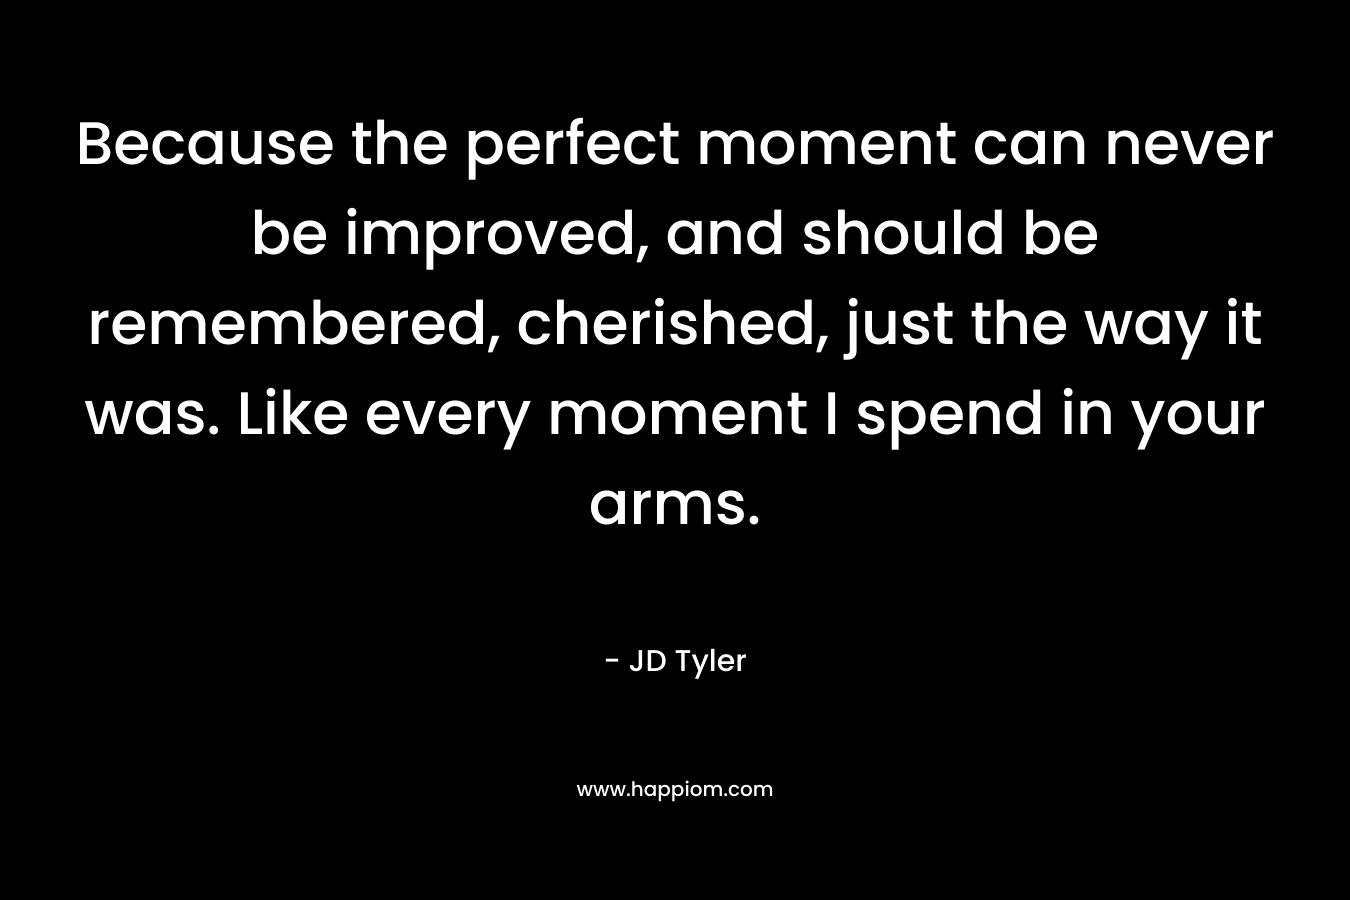 Because the perfect moment can never be improved, and should be remembered, cherished, just the way it was. Like every moment I spend in your arms. – JD Tyler